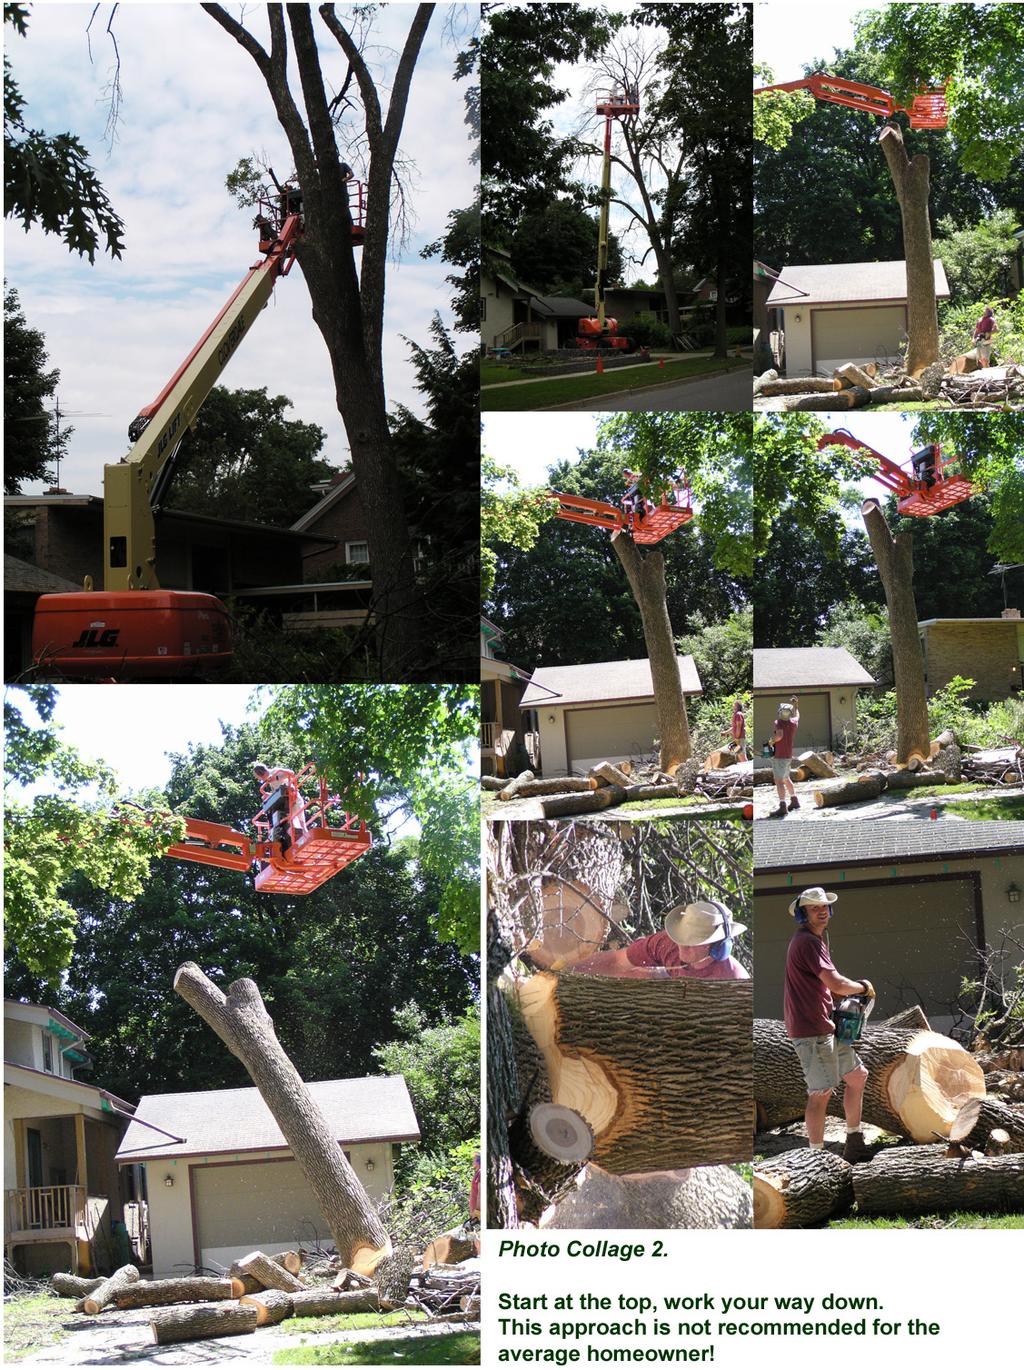 Nystuen, Solstice Vol. XVI, No. 2. Experience and initiative pay off. The homeowner was experienced in running a cherry picker and his brother-in-law had experience cutting trees.